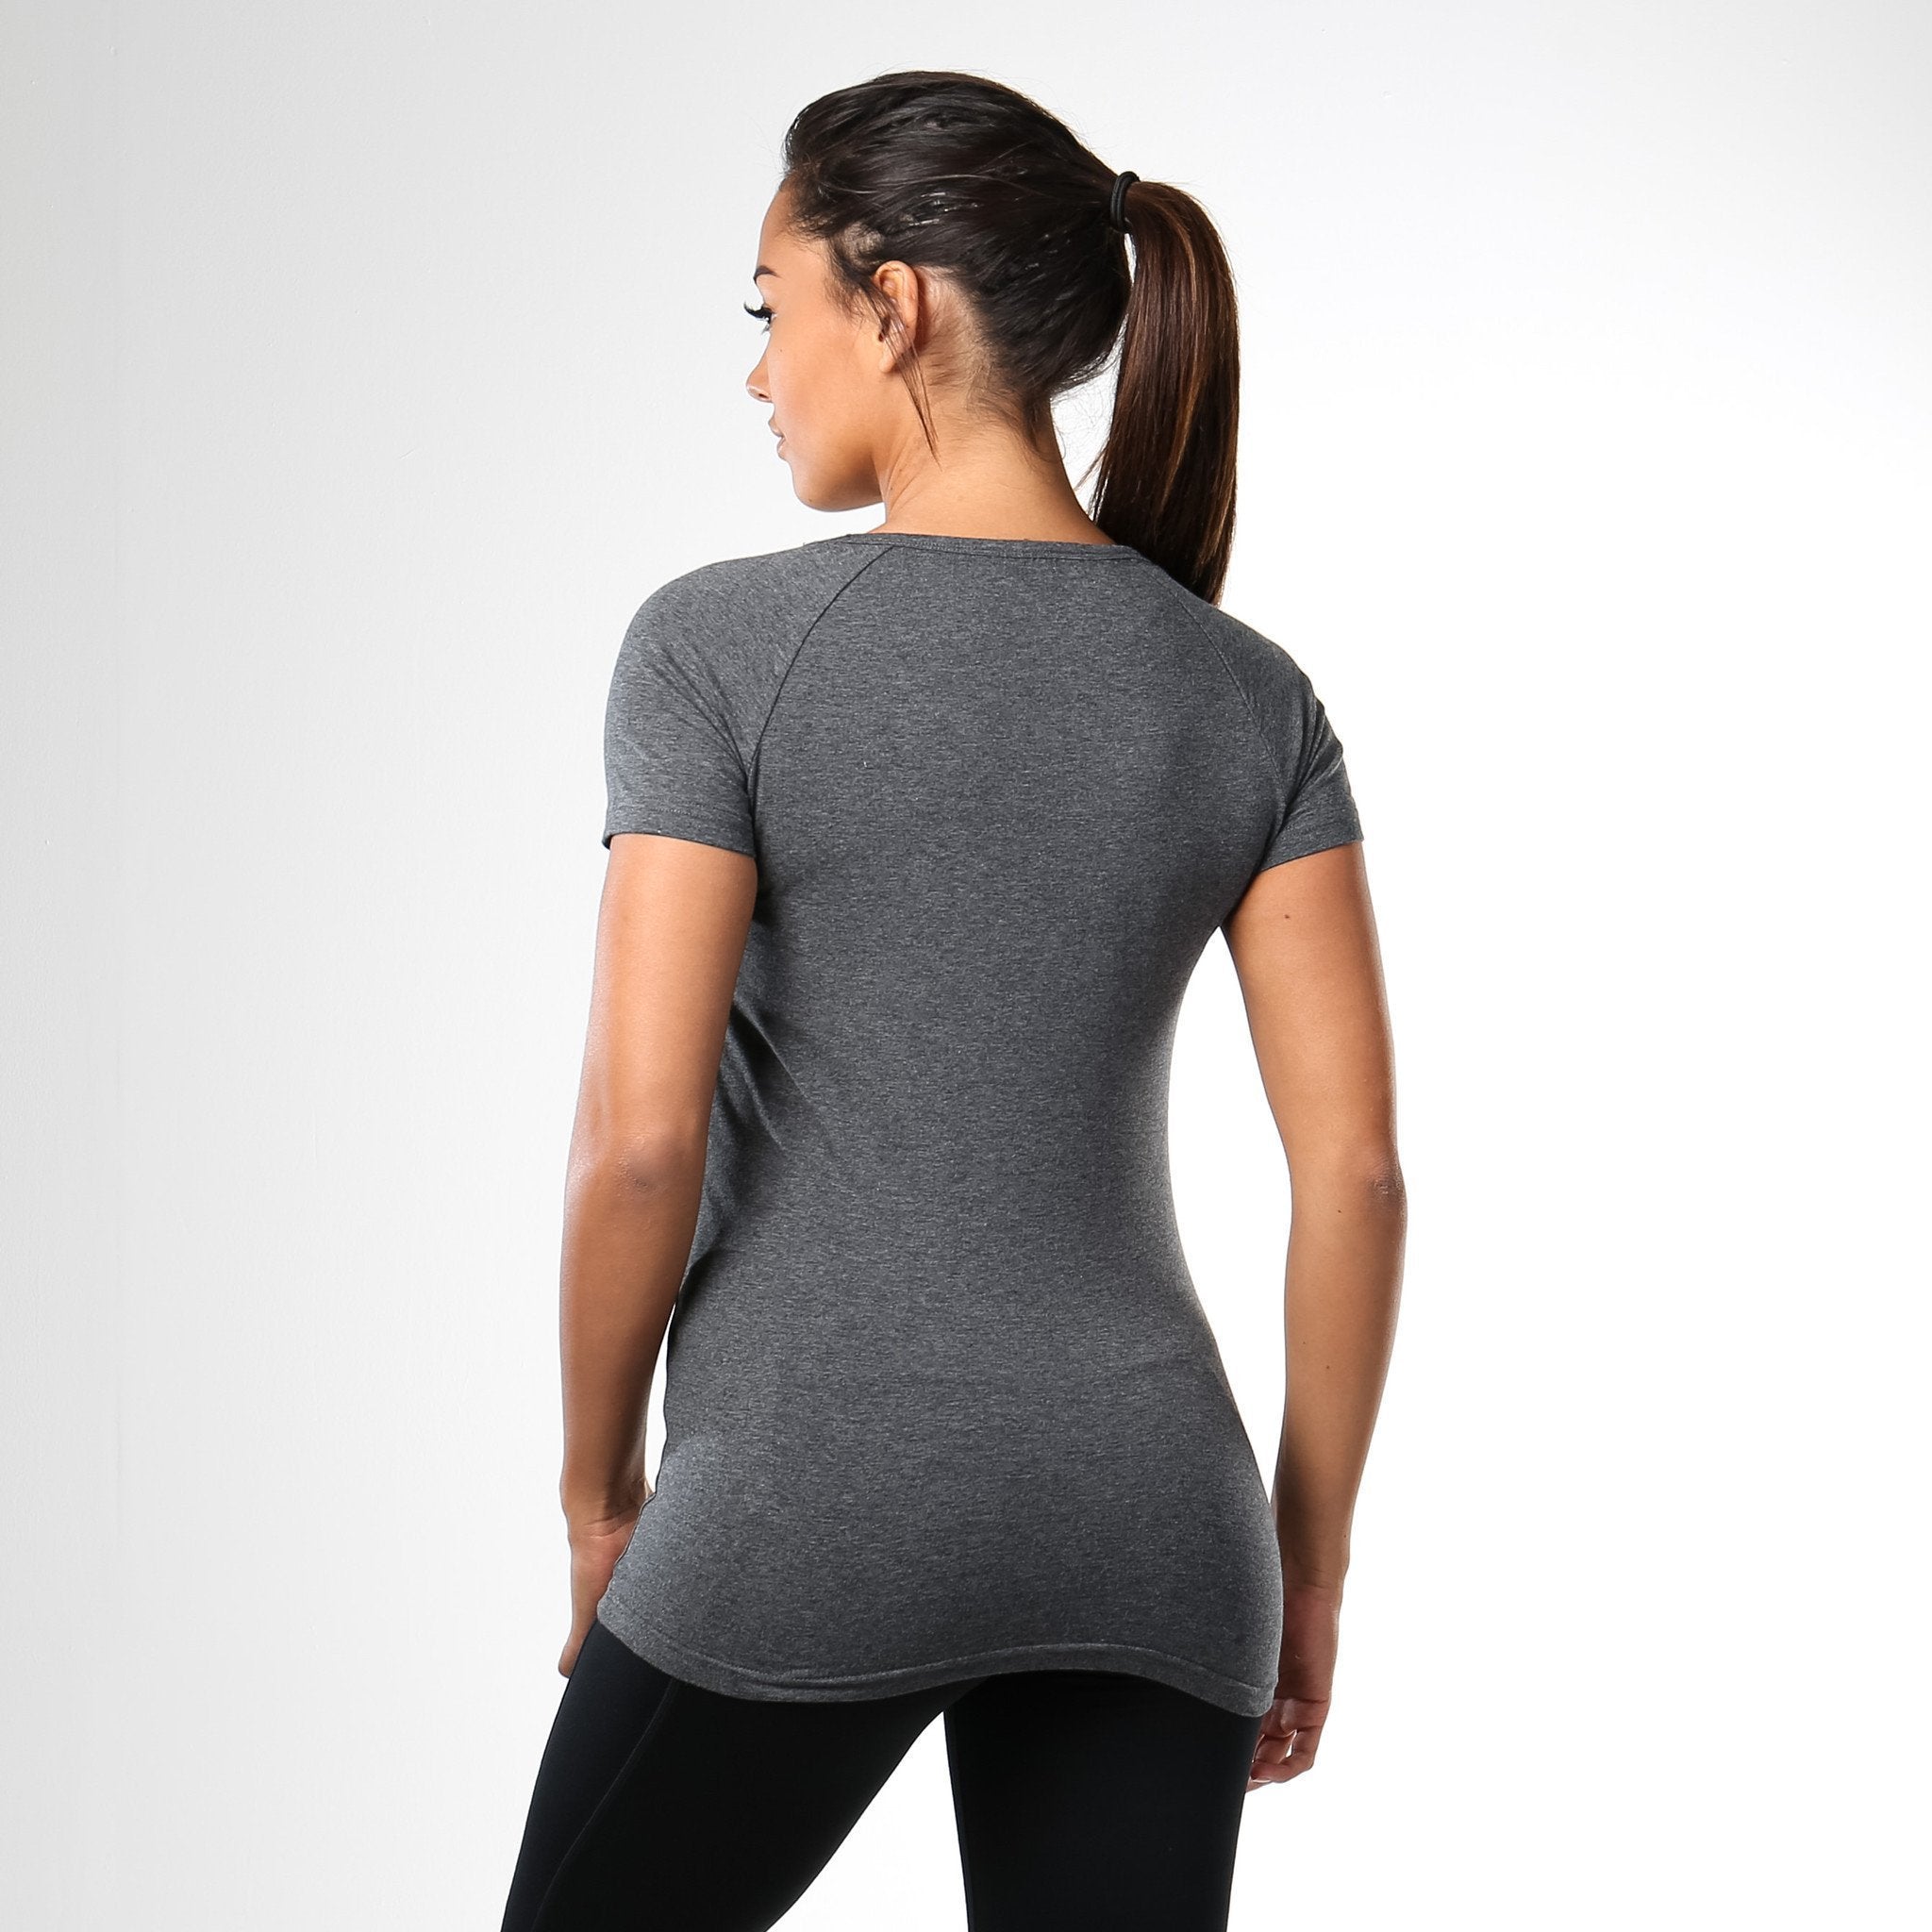 Ladies Apollo T-Shirt in Charcoal Marl - view 3